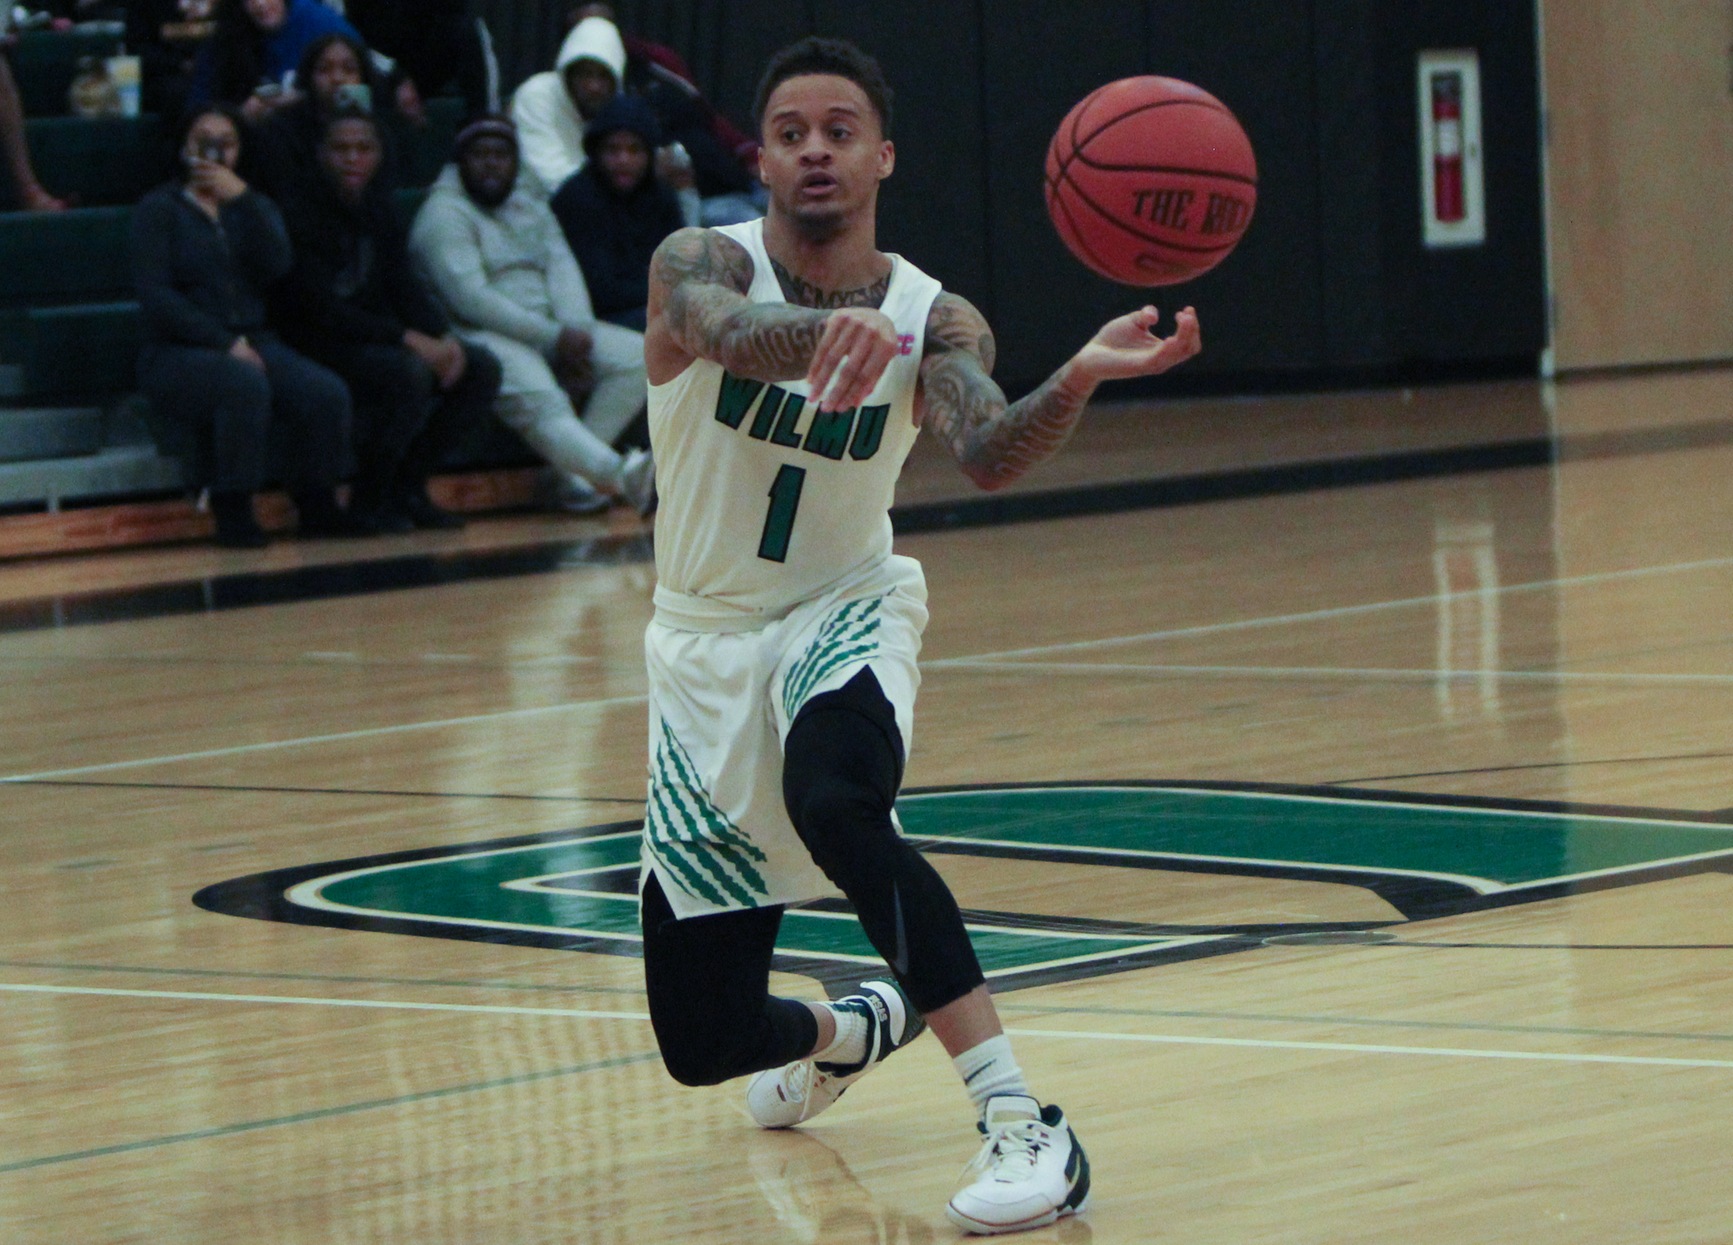 File photo of Jermaine Head who dished out 14 assists while scoring 17 points at Caldwell. Copyright 2020; Wilmington University. All rights reserved. Photo by Samantha Kelley. February 4, 2020 vs. Chestnut Hill.